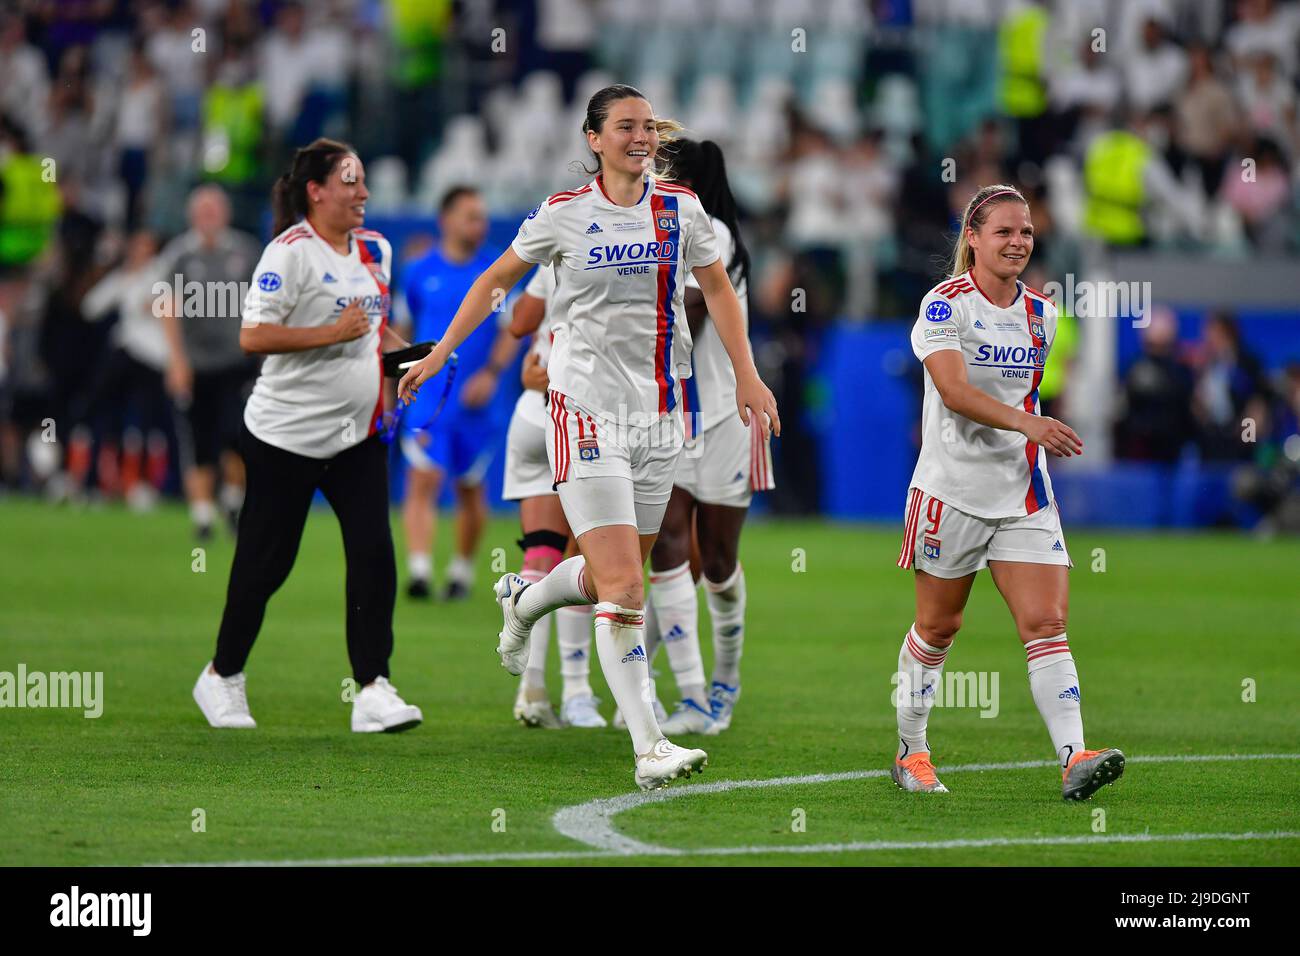 Turin, Italy. 21st, May 2022. Damaris Egurrola (11) and Eugenie Le Sommer (9) of Olympique Lyon are celebrating winning the UEFA Women’s Champions League final between Barcelona and Olympique Lyon at Juventus Stadium in Turin. (Photo credit: Gonzales Photo - Tommaso Fimiano). Stock Photo